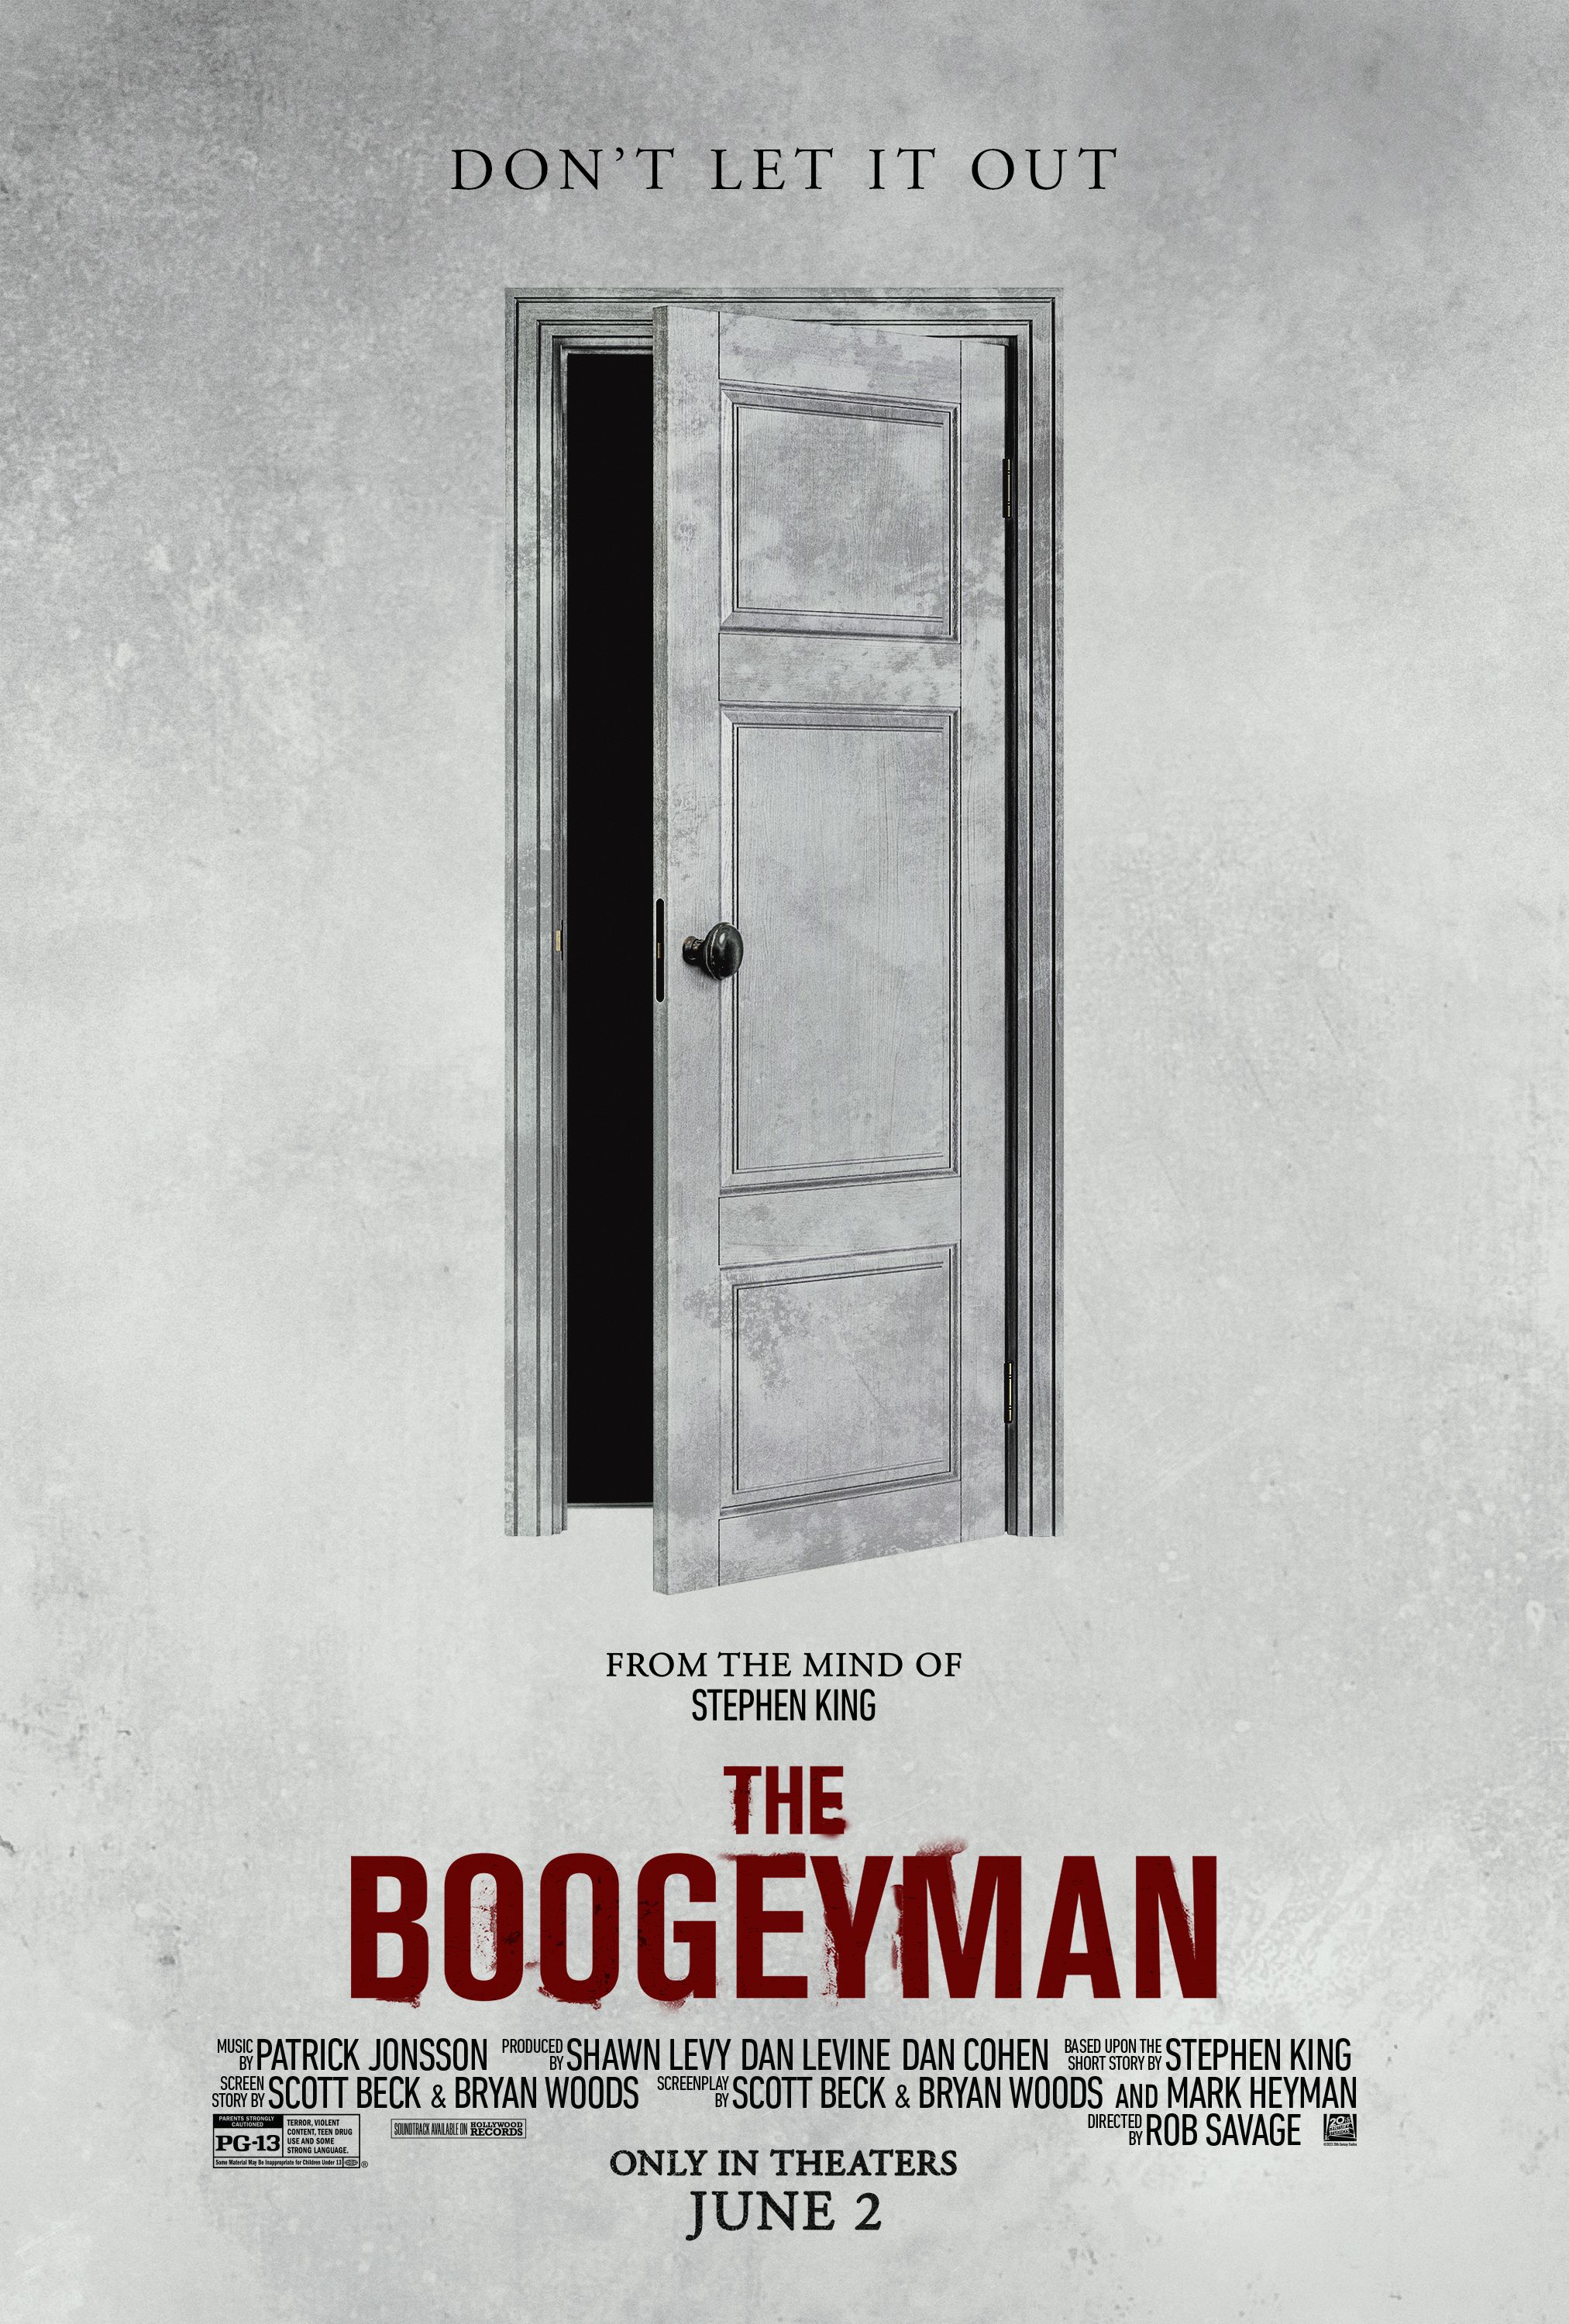 Official Trailer And Poster For 'The Boogeyman'